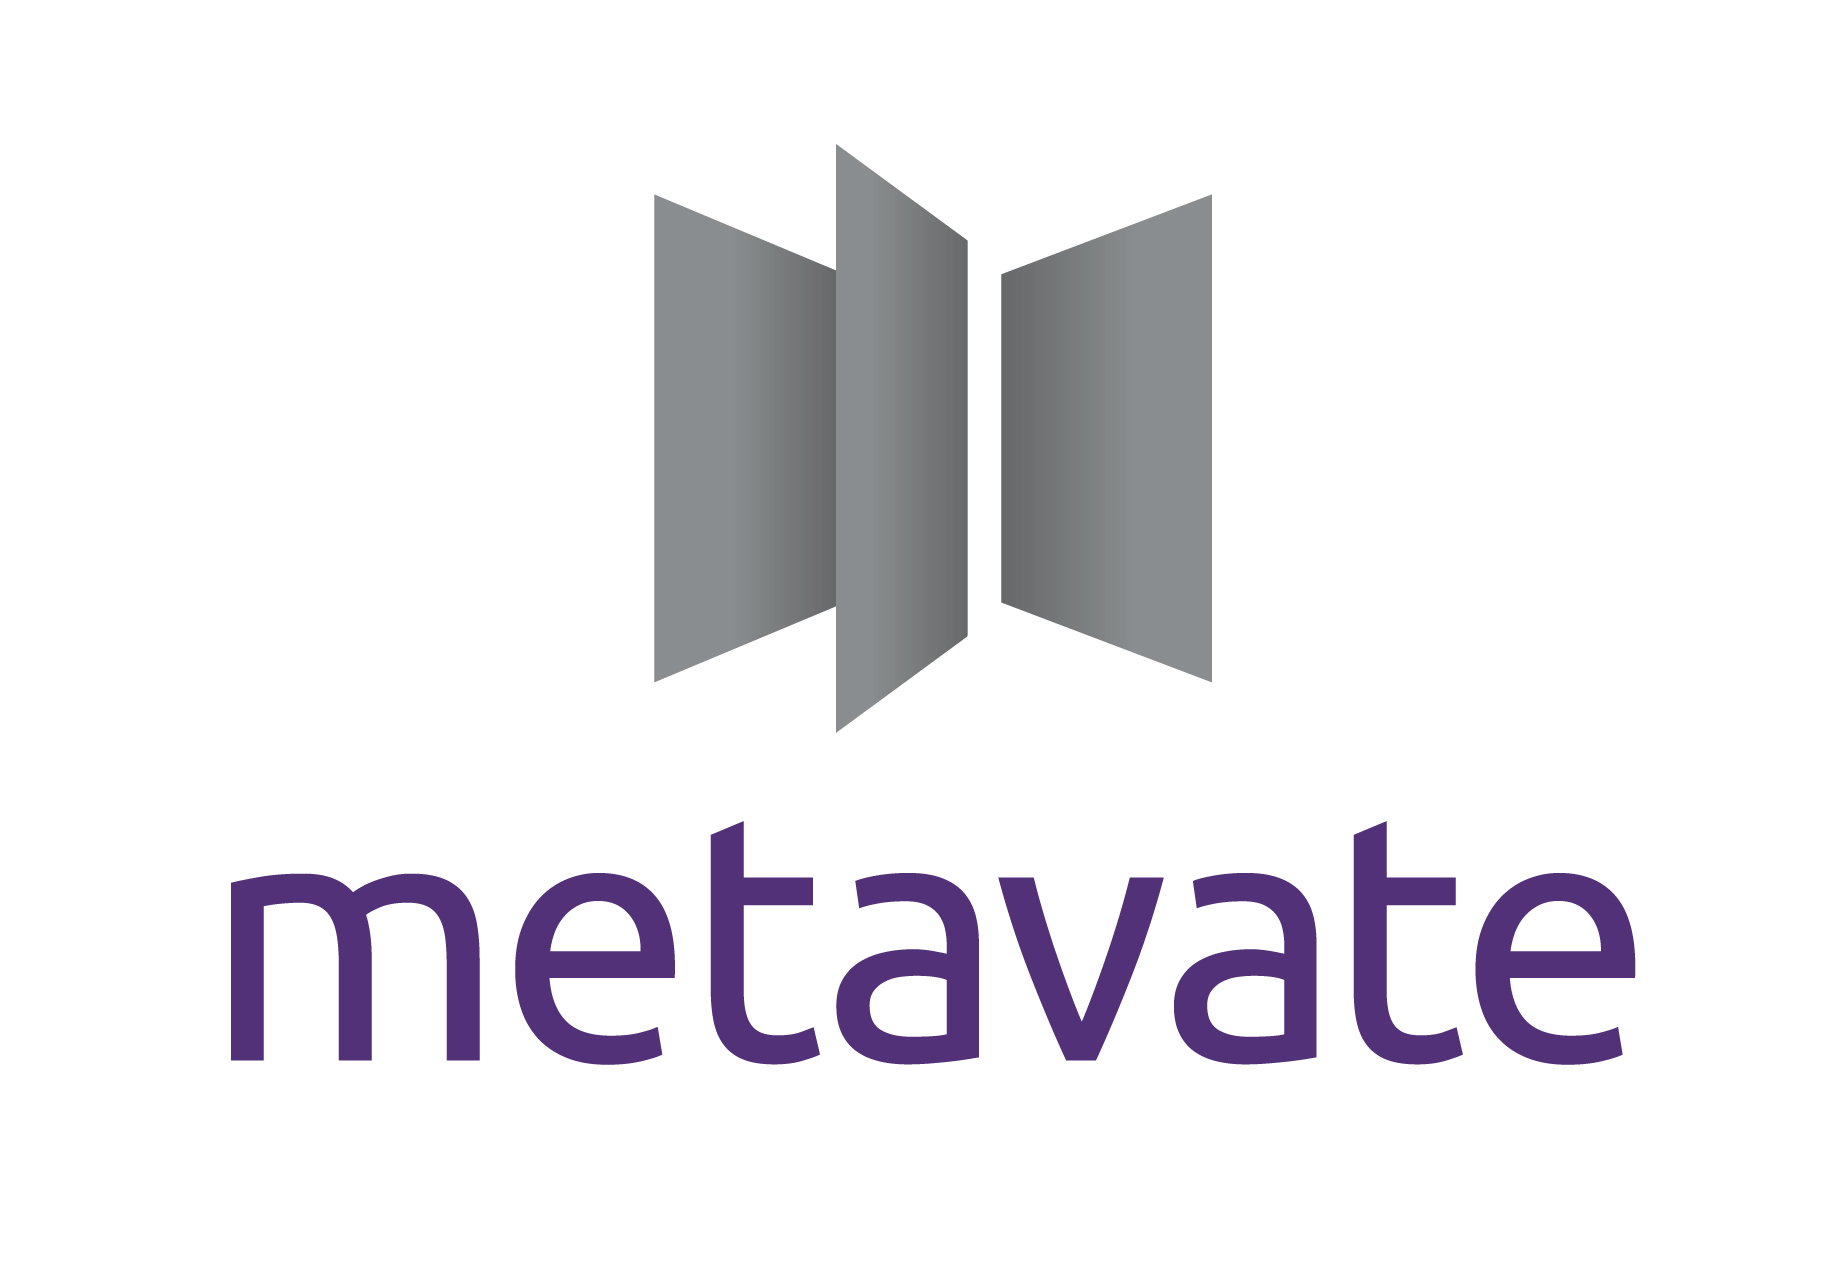 Metavate - The future of metal pre-treatment and processes